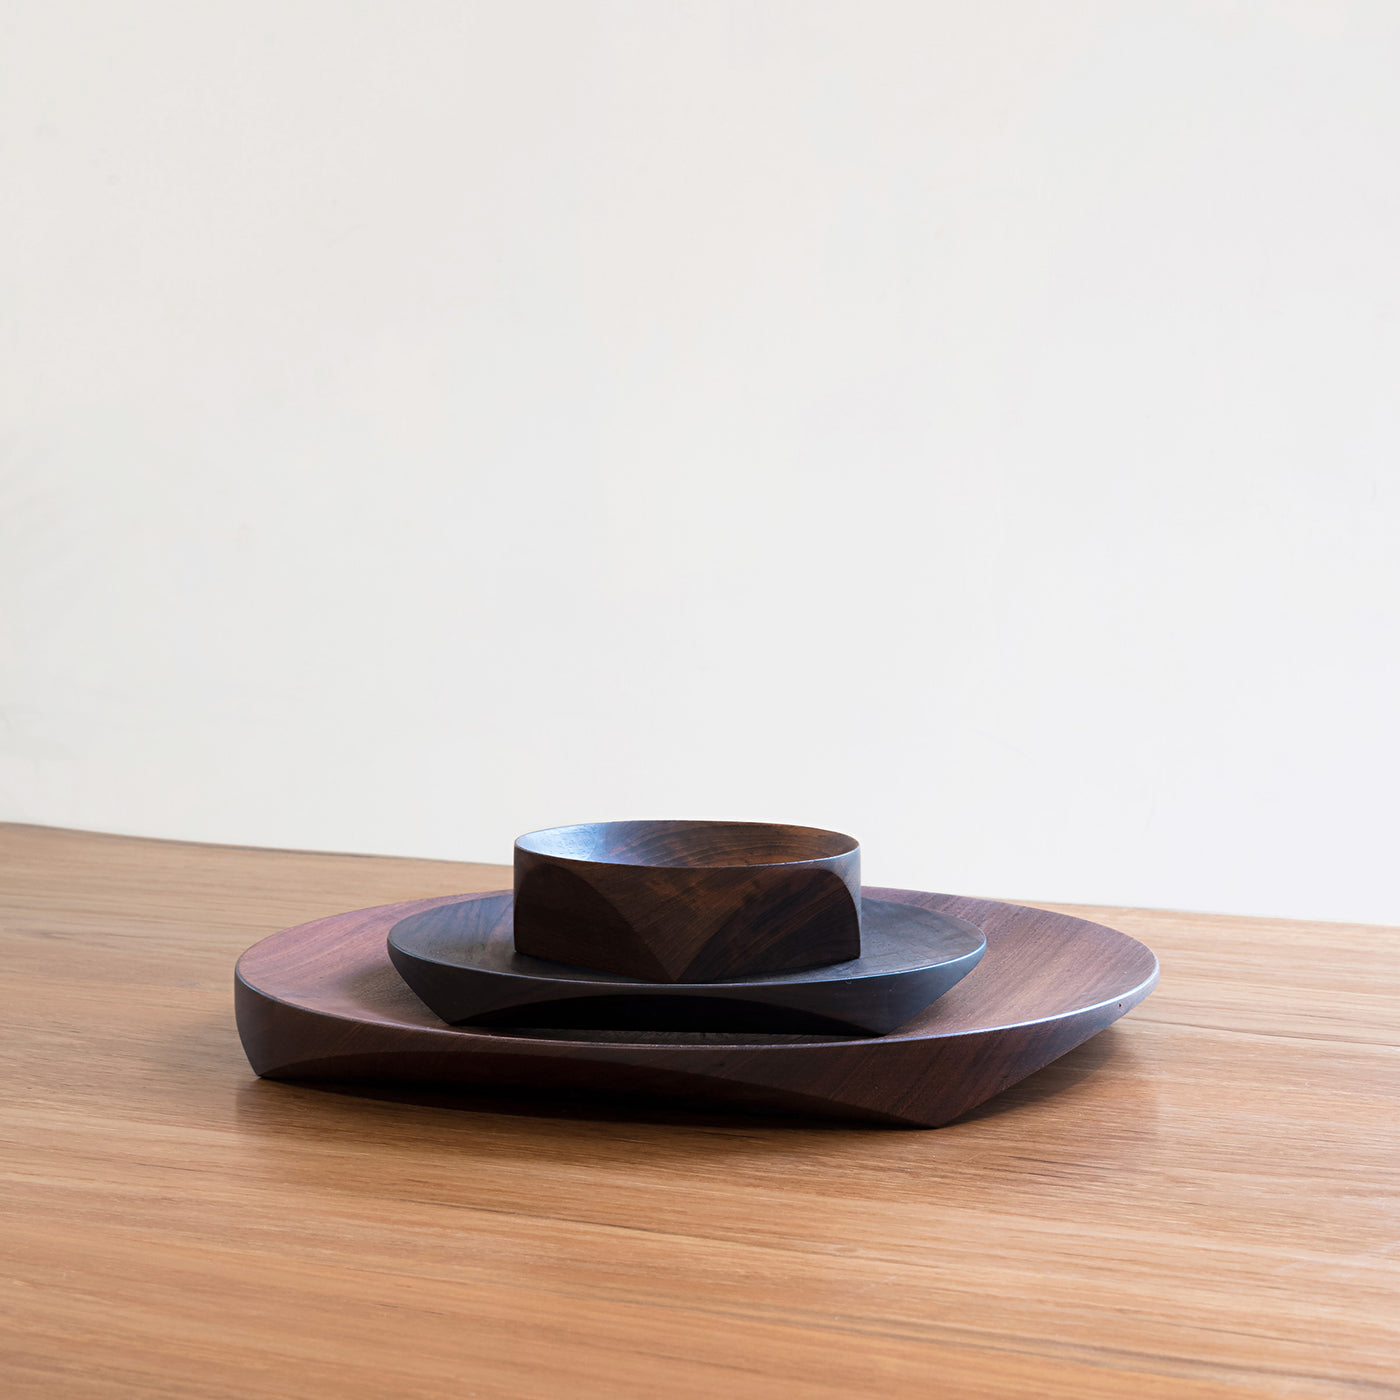 Topologic Flat Bowls by Casegoods